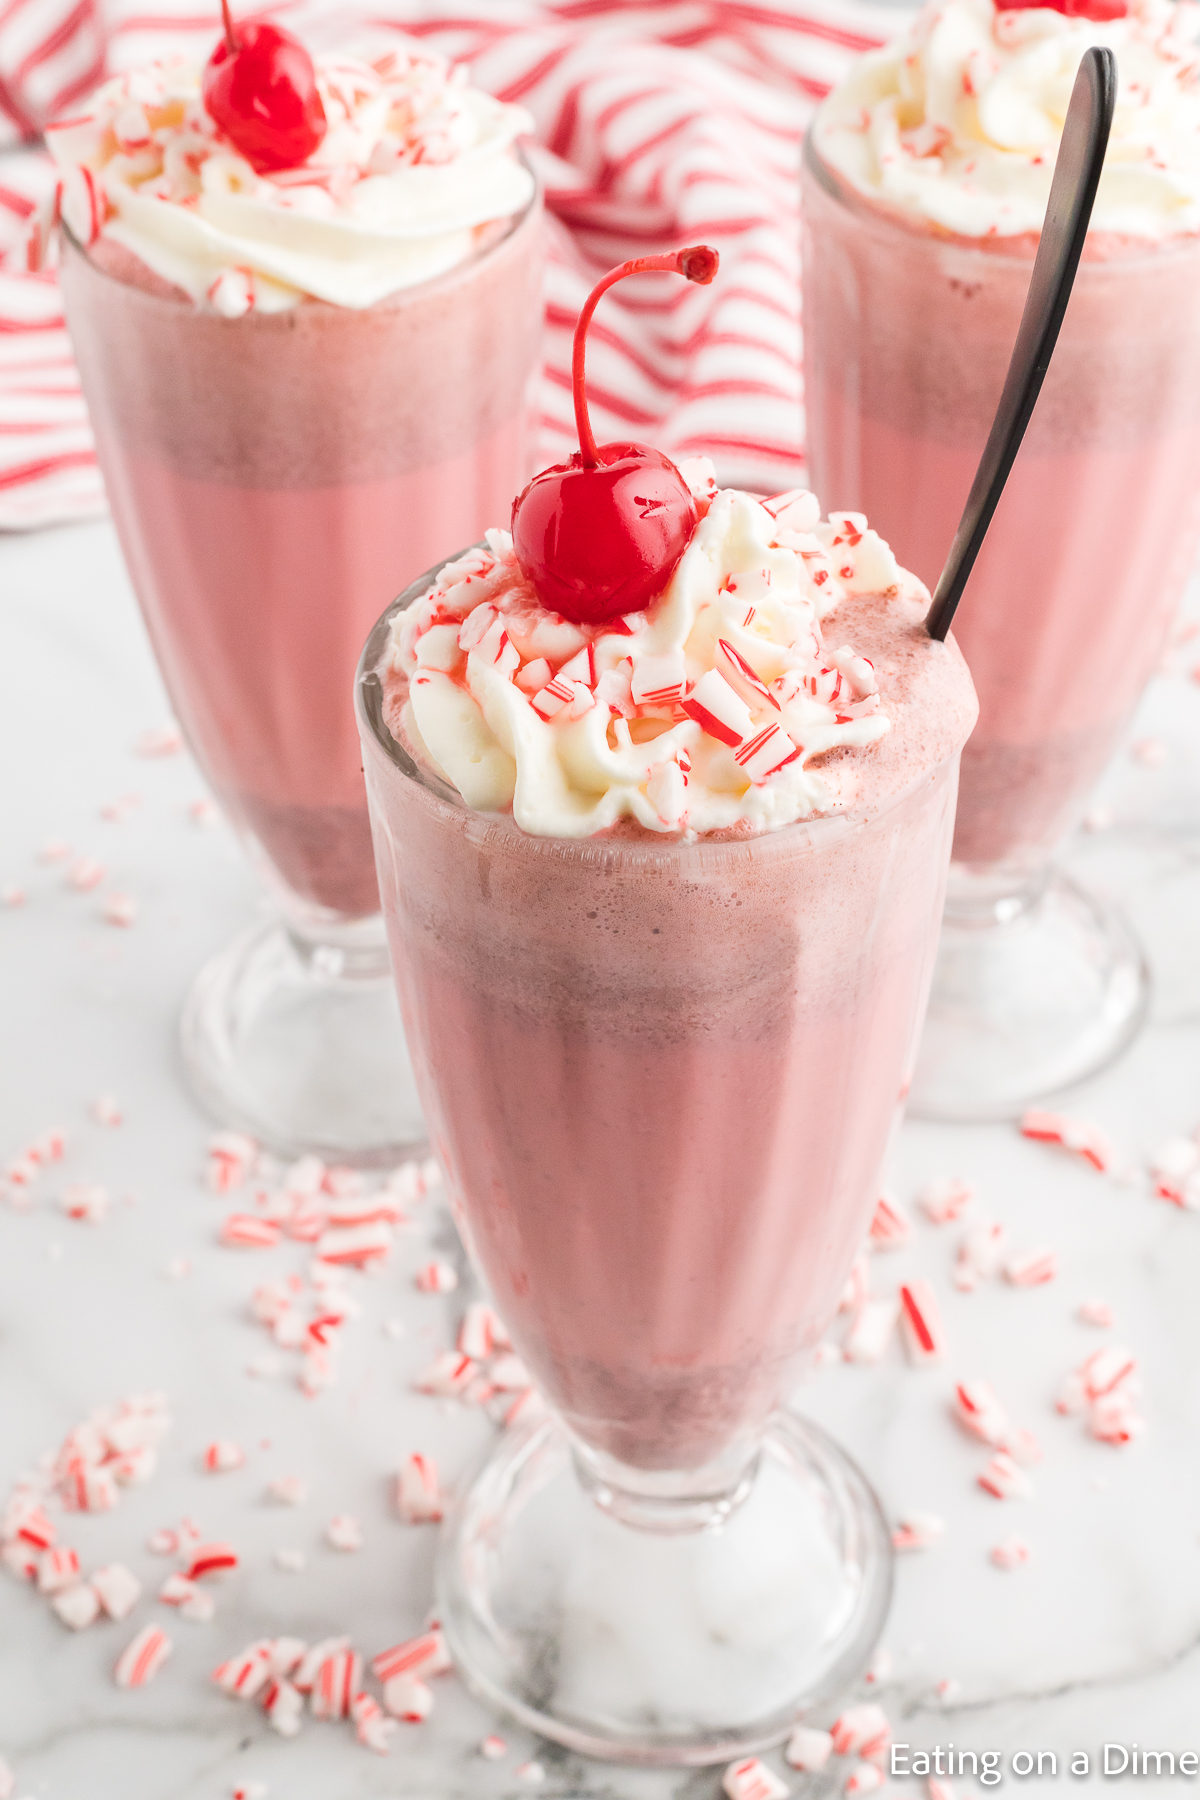 Close up image of Peppermint Milkshake in a glass topped with whipped cream in cherries